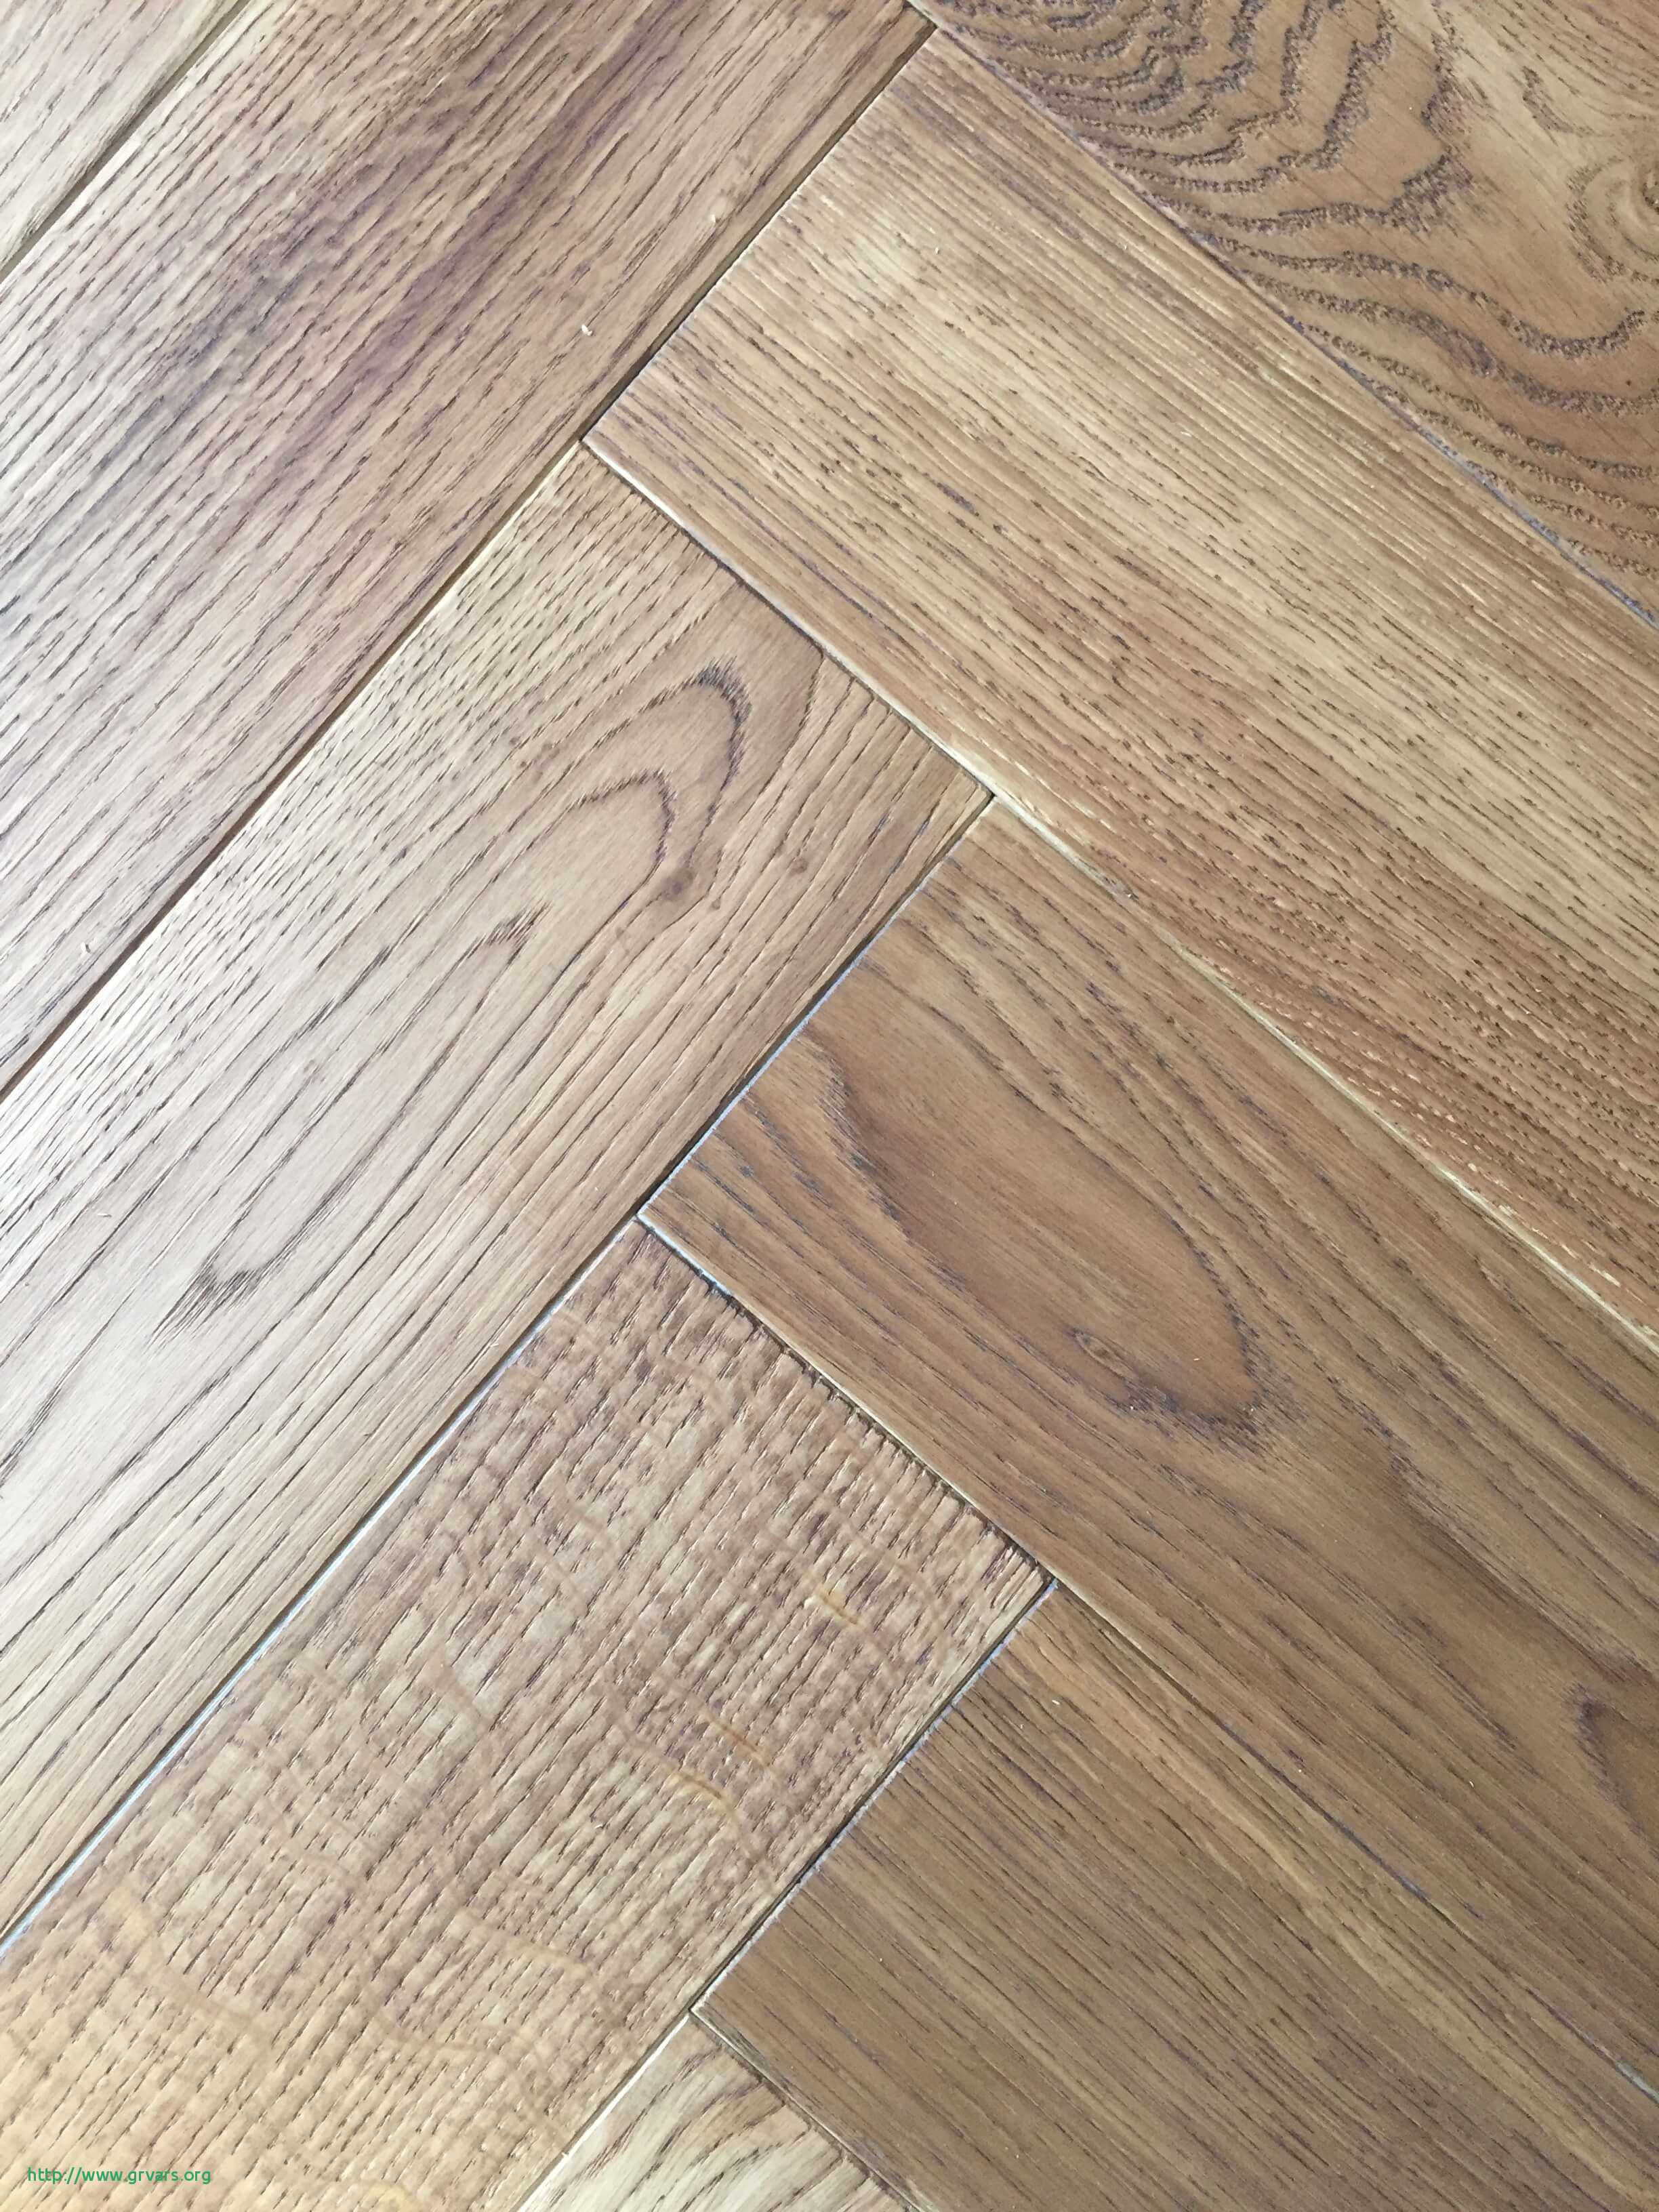 14 Famous Hardwood Vs Engineered Flooring Cost 2024 free download hardwood vs engineered flooring cost of 21 luxe how much would laminate flooring cost ideas blog with regard to wood how much would laminate flooring cost inspirant laminate flooring ideas